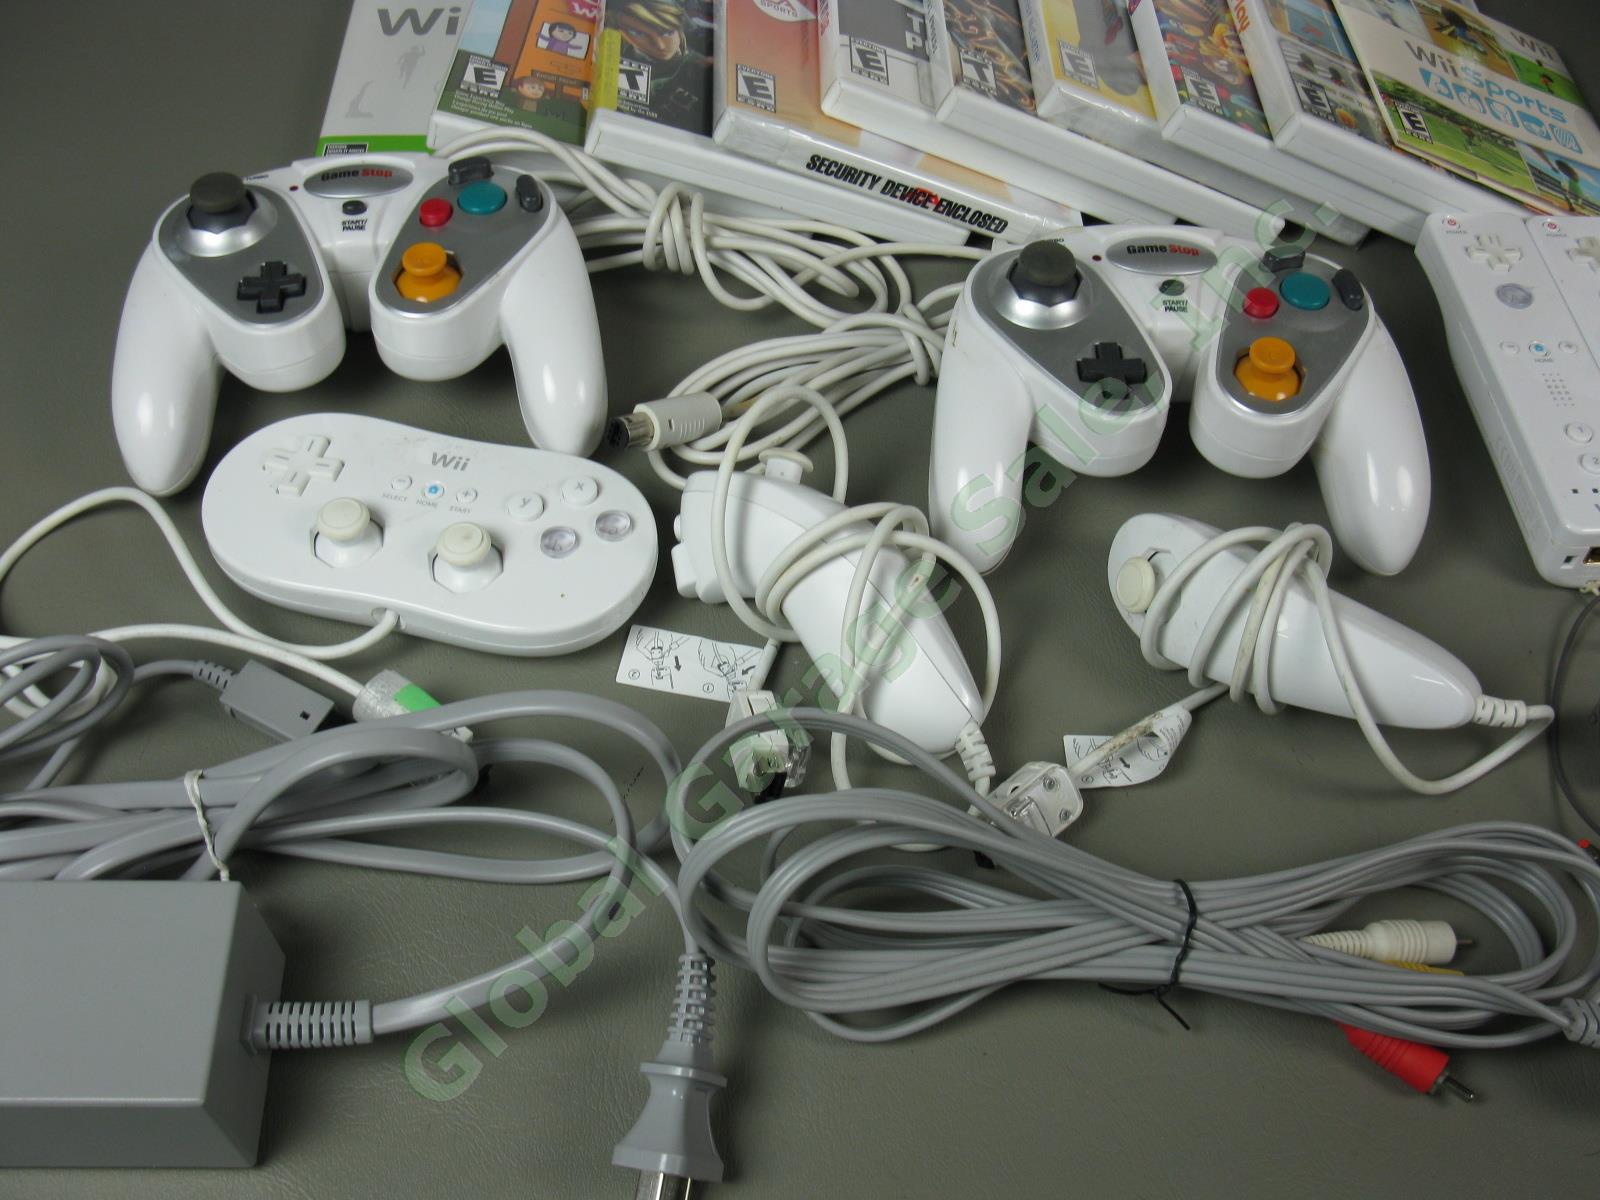 Nintendo Wii Lot White Console System 10 Games 3 Remotes 3 Controller 2 Nunchuck 1